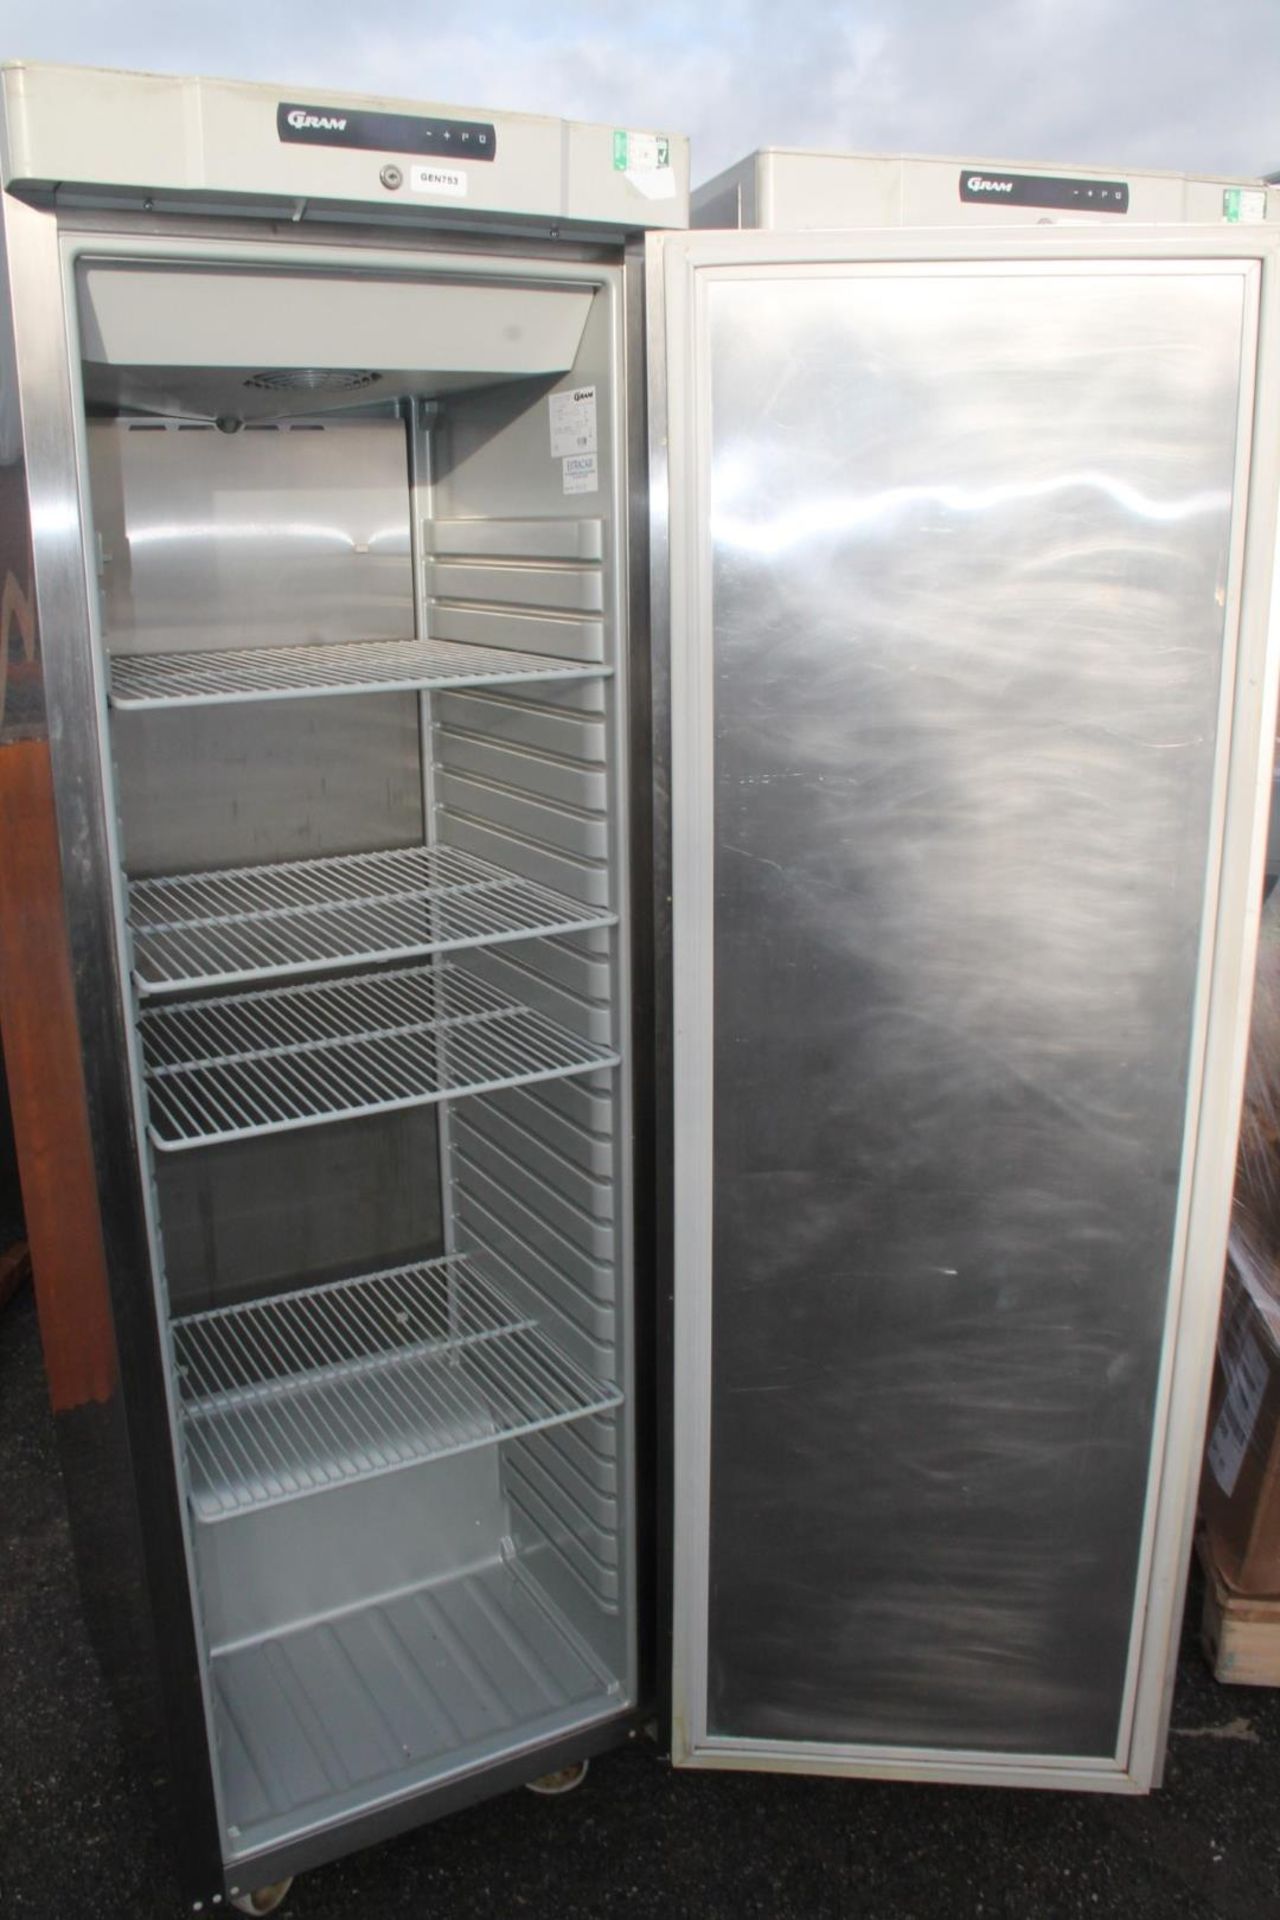 1 x GRAM Stainless Steel Commercial Upright Freezer - Ref: GEN753 WH2 - CL811 BEL - Location: - Image 5 of 6